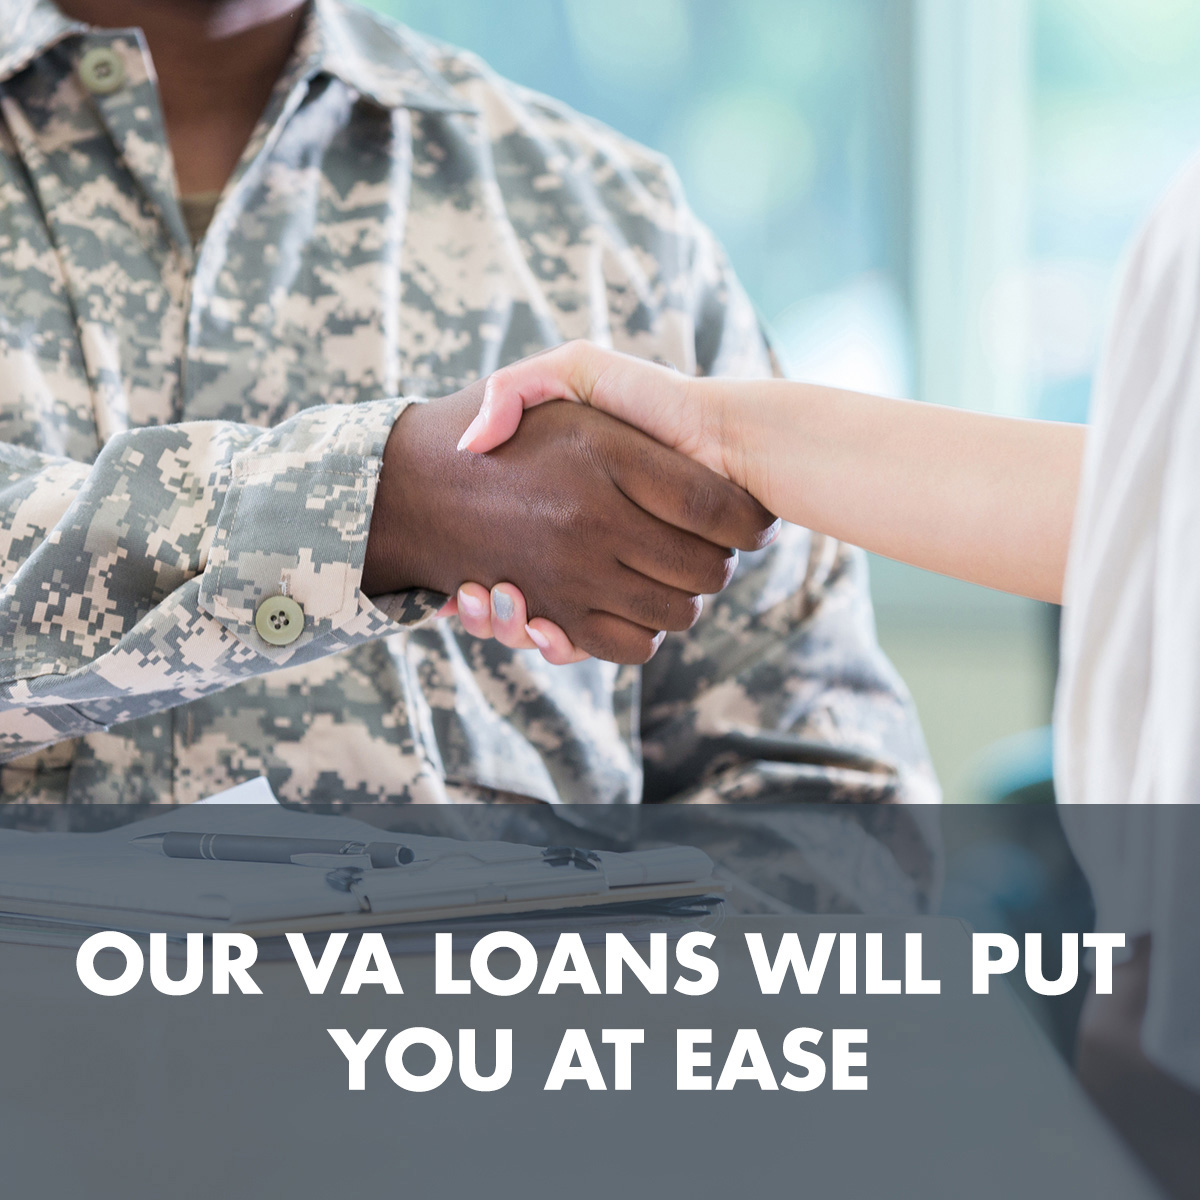 You deserve big home savings. Ask us about our VA loans to know your options.

#EfficientLending #FlRealEstate #TxRealEstate #CoRealEstate